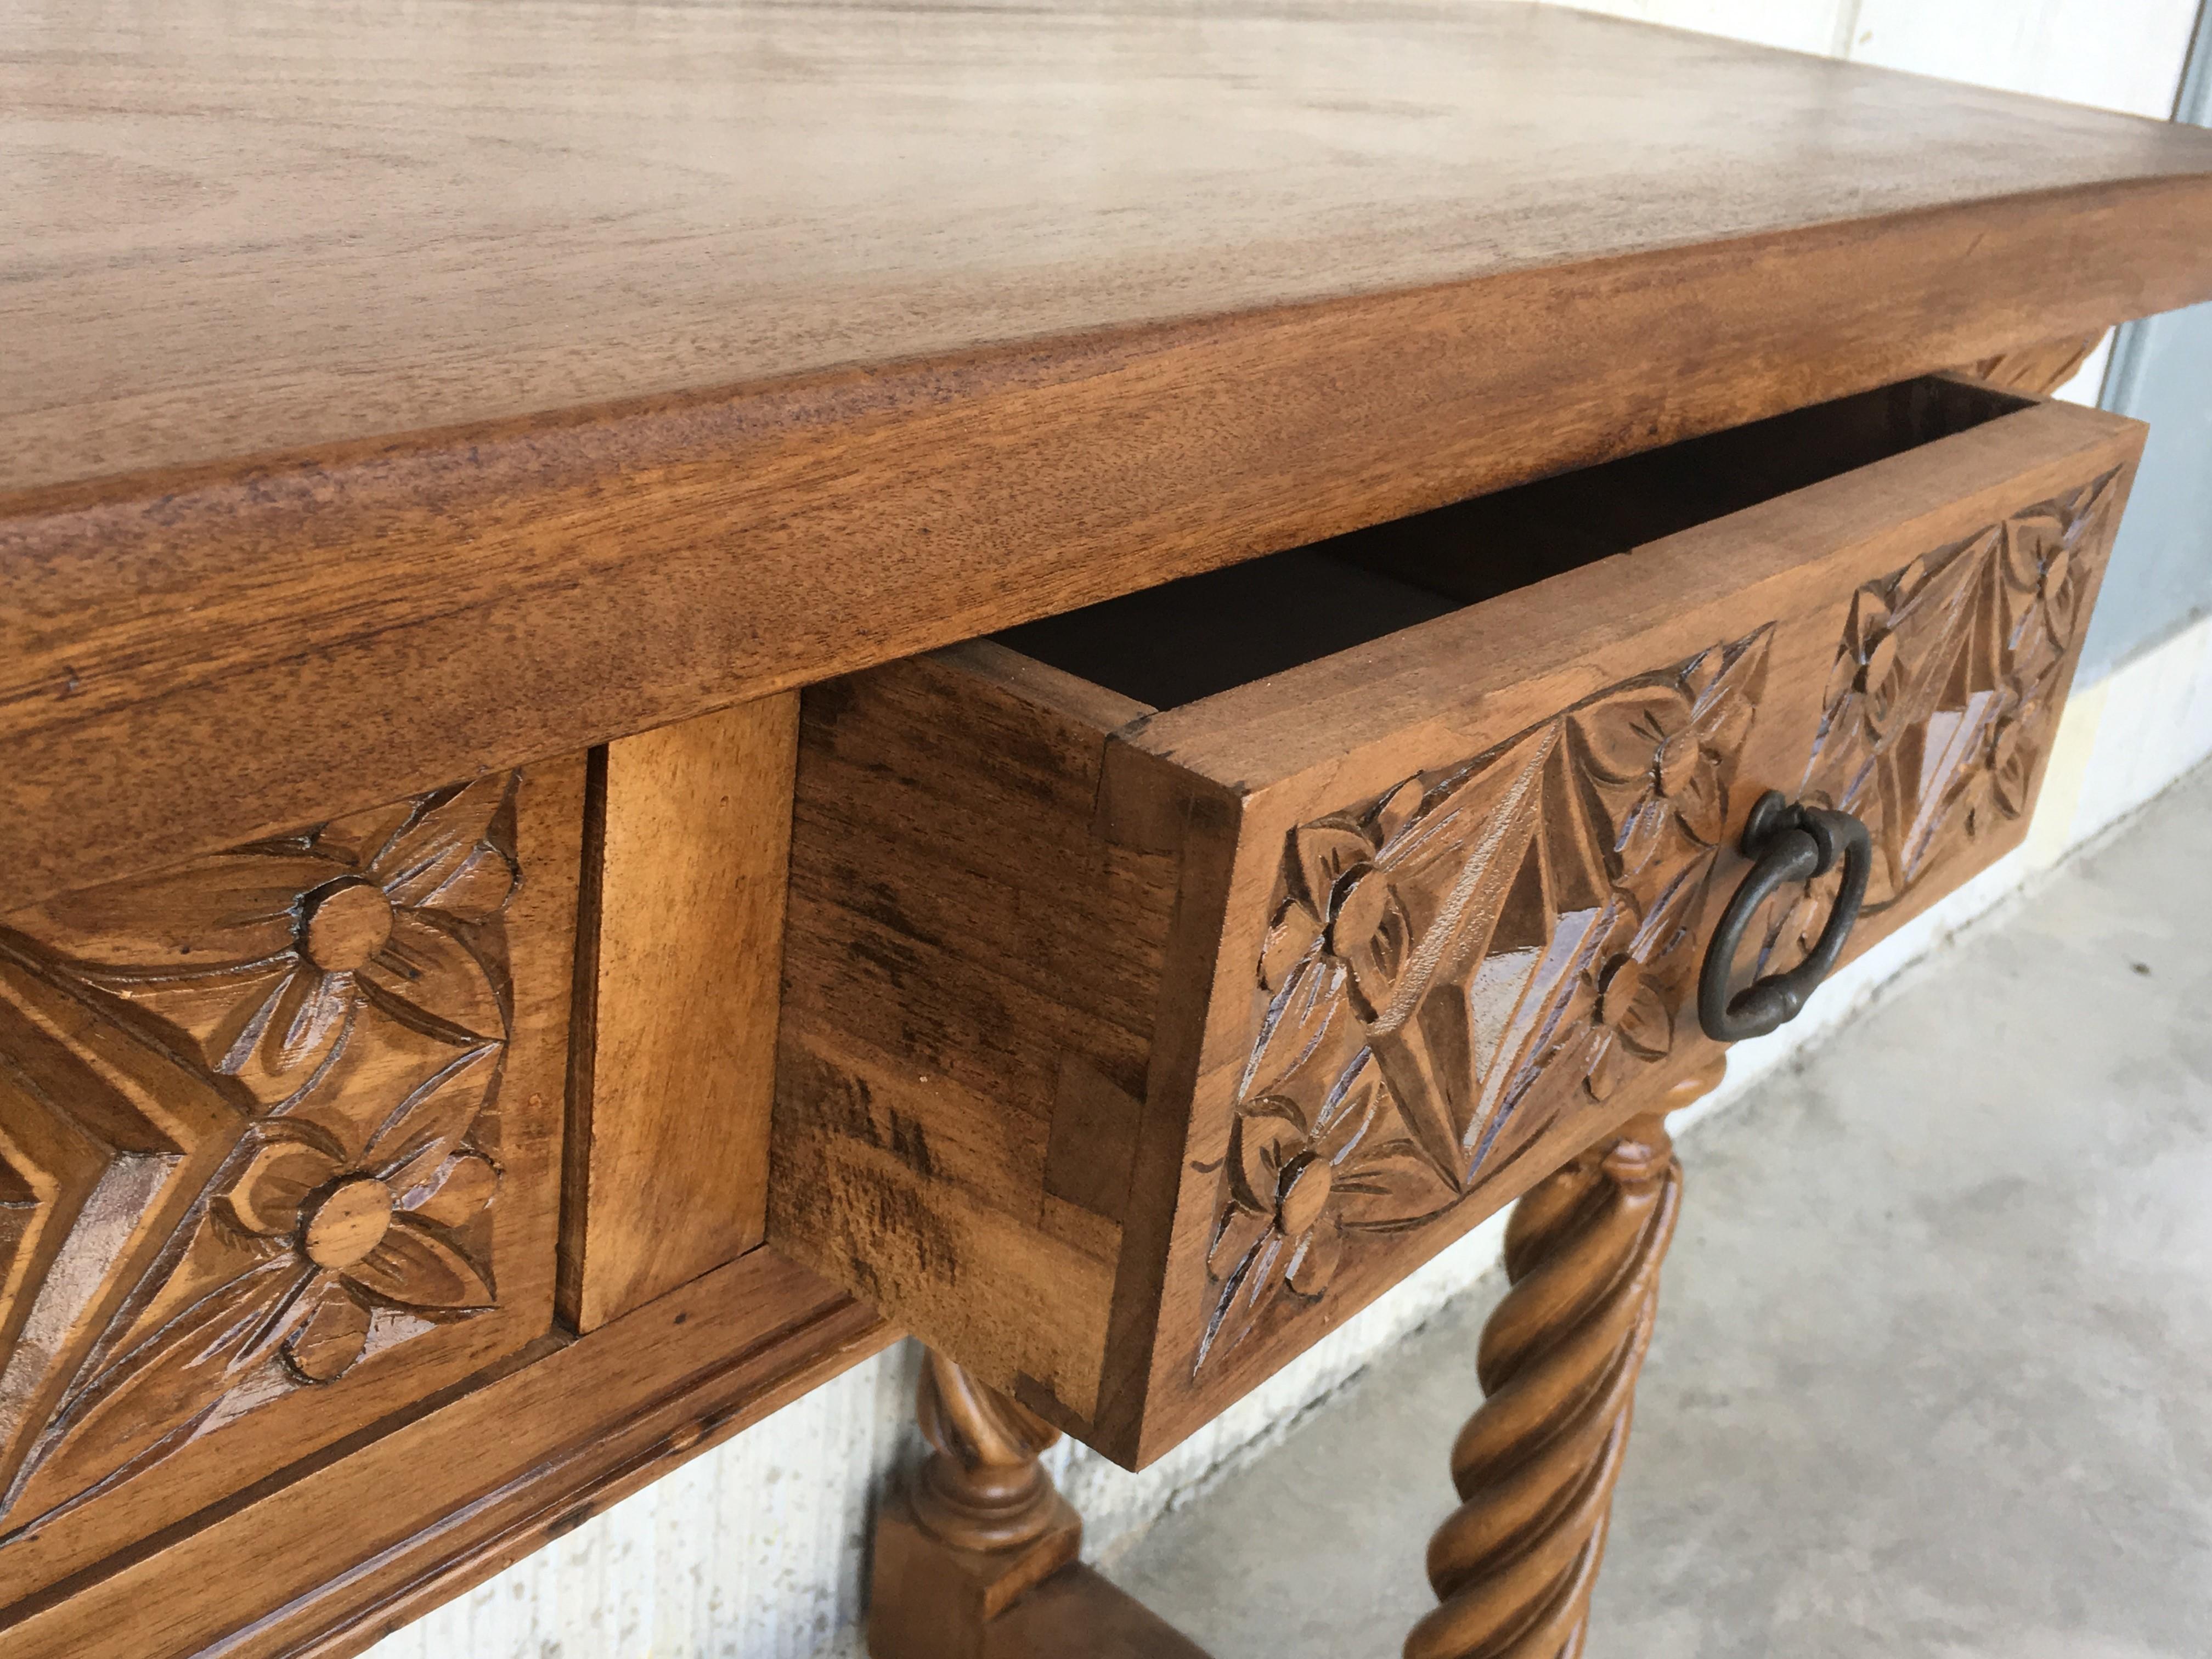 18th Century Spanish Catalan Carved Console Table with Two Drawers im Zustand „Hervorragend“ in Miami, FL